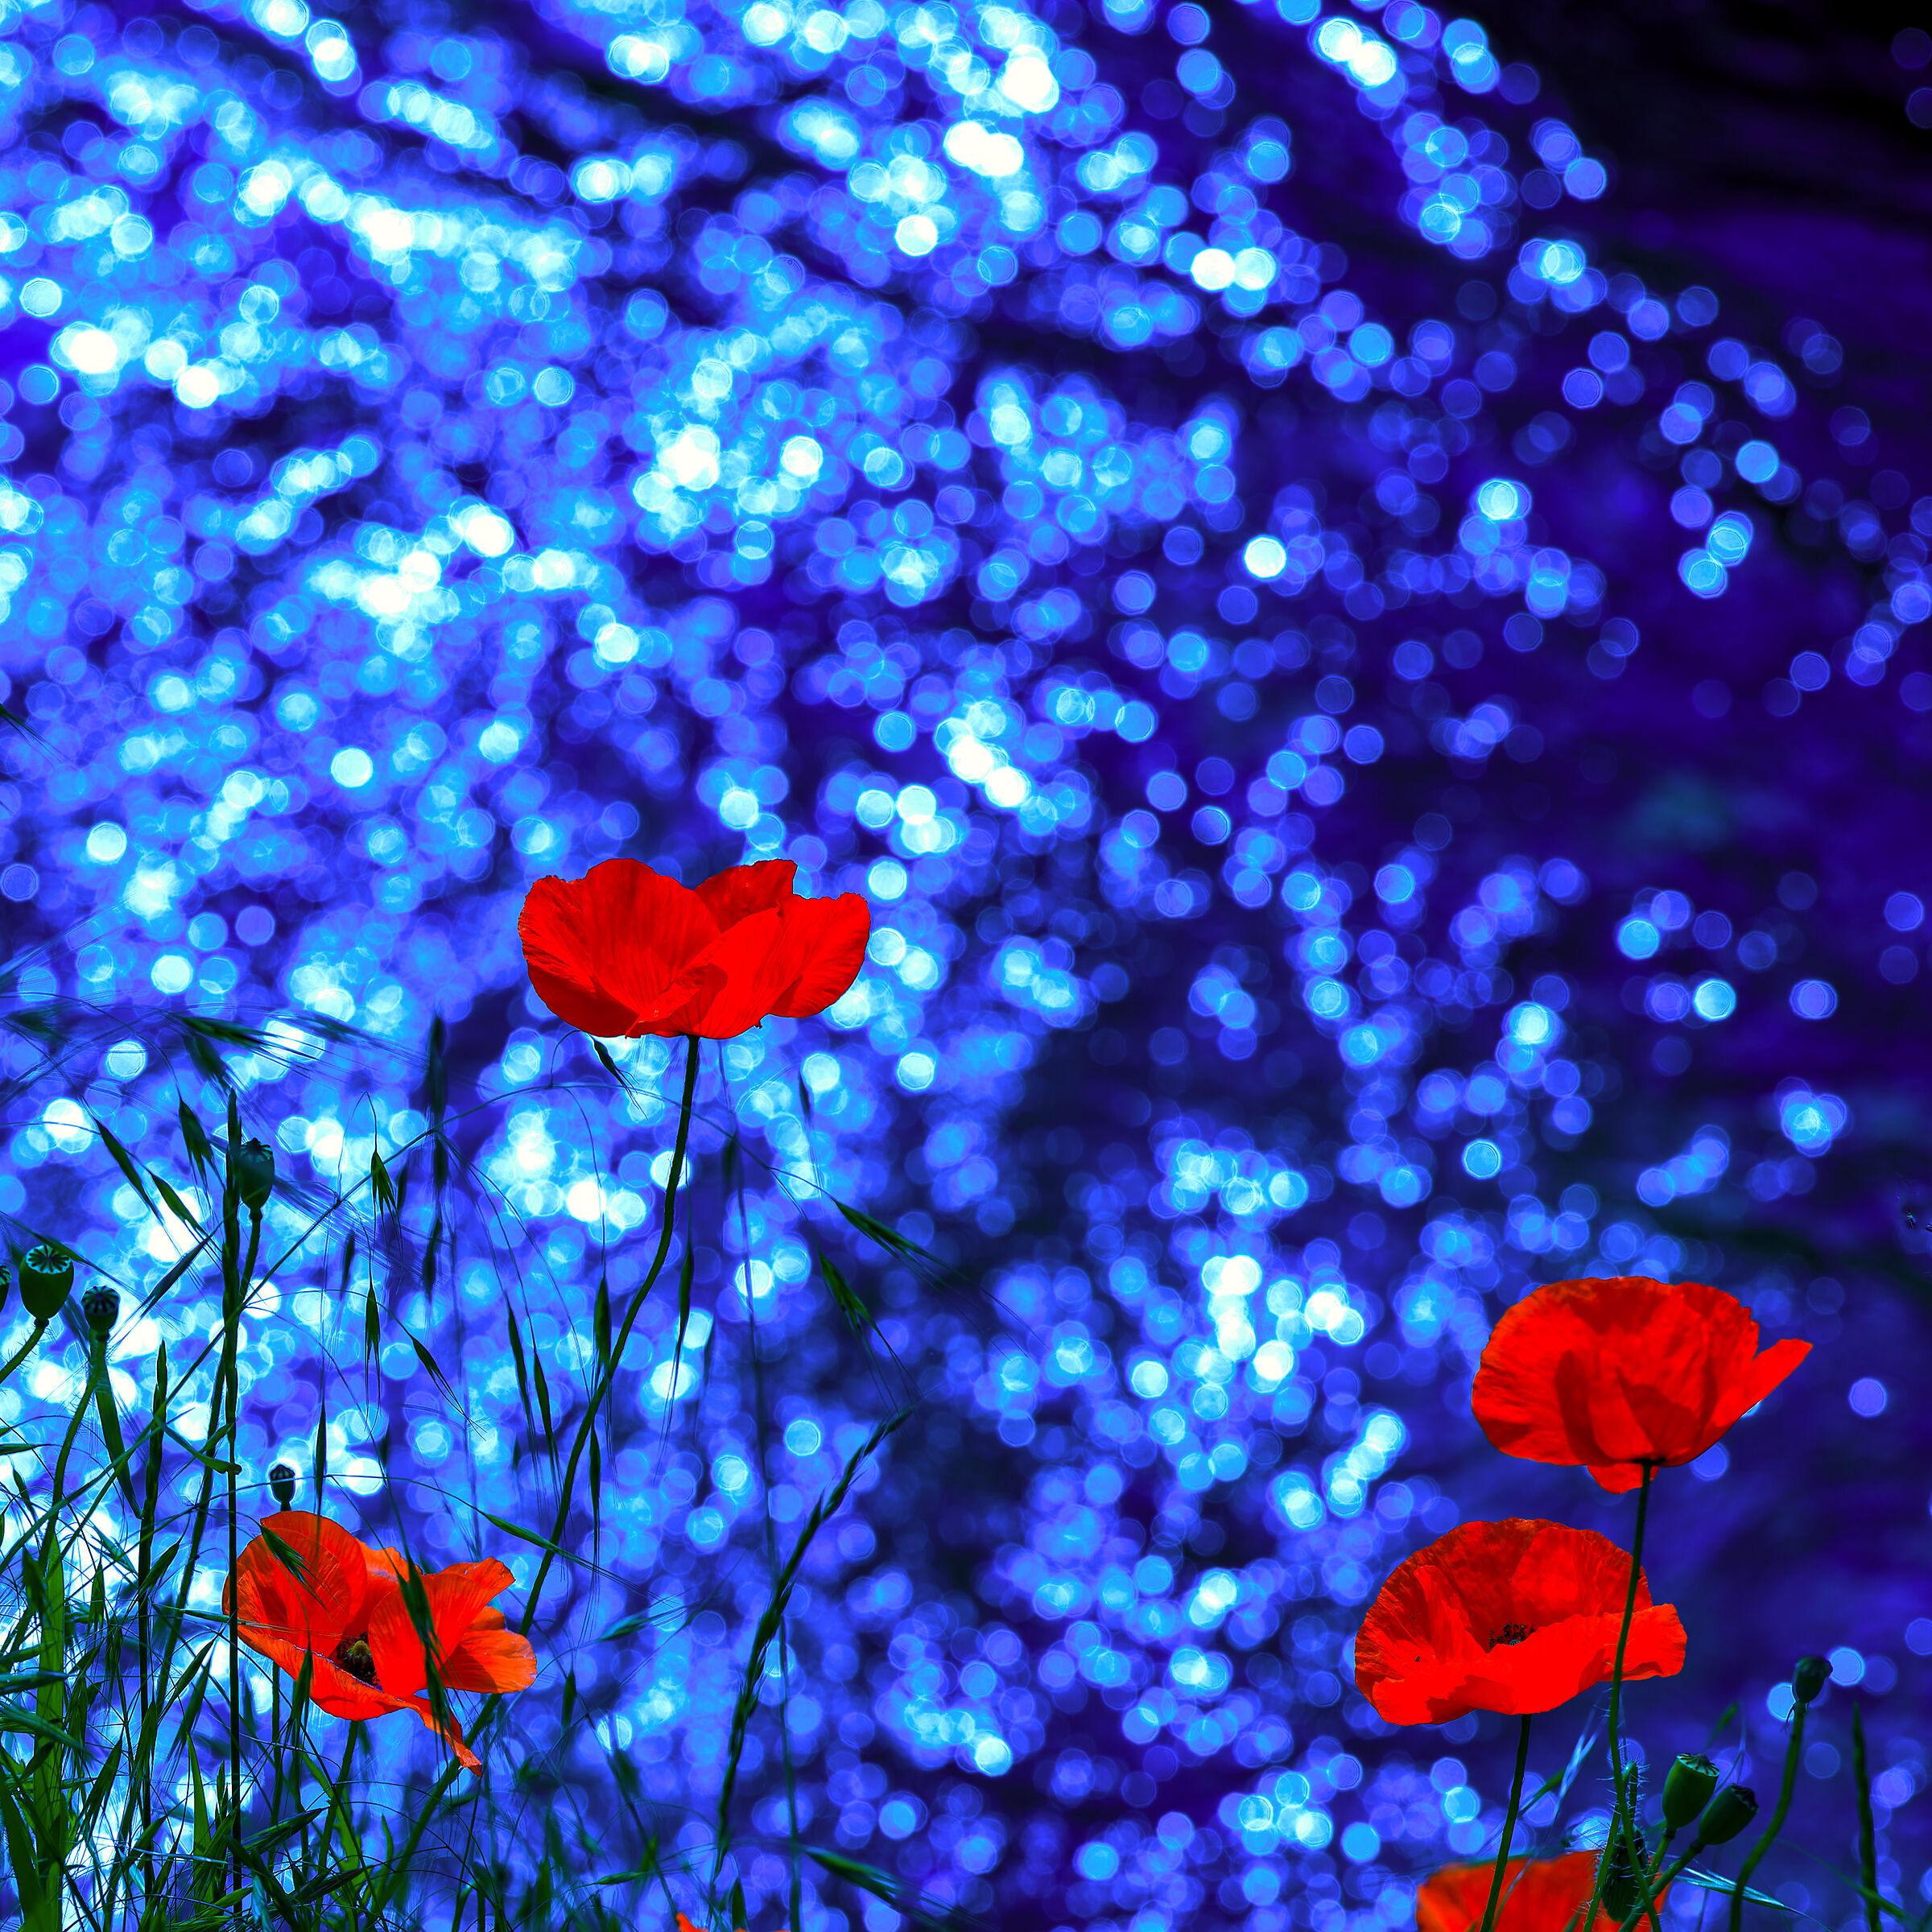 Poppies in the moonlight...